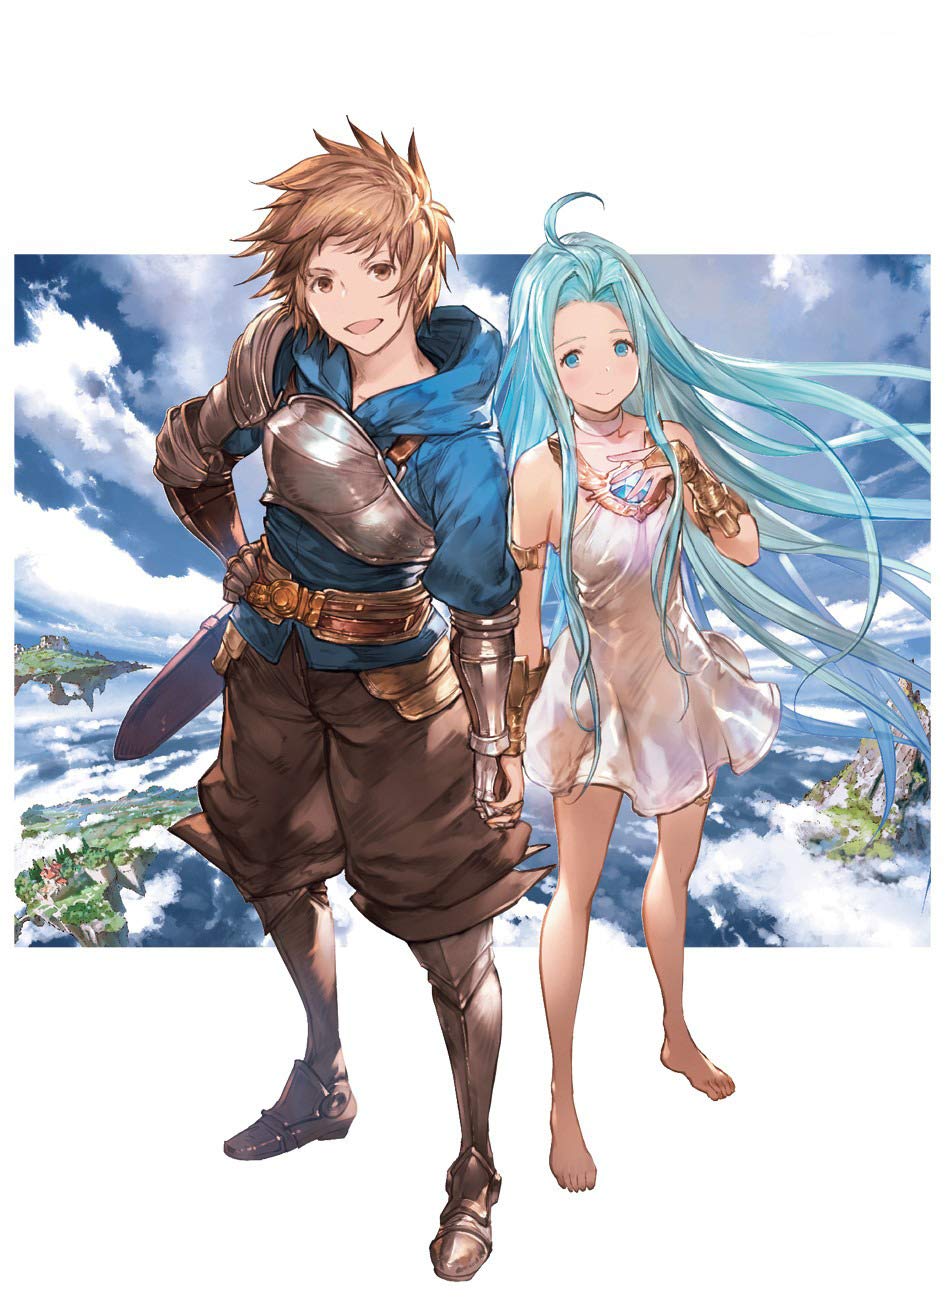 First Impressions Granblue Fantasy the Animation 2 Recap and Review   Otaku Orbit